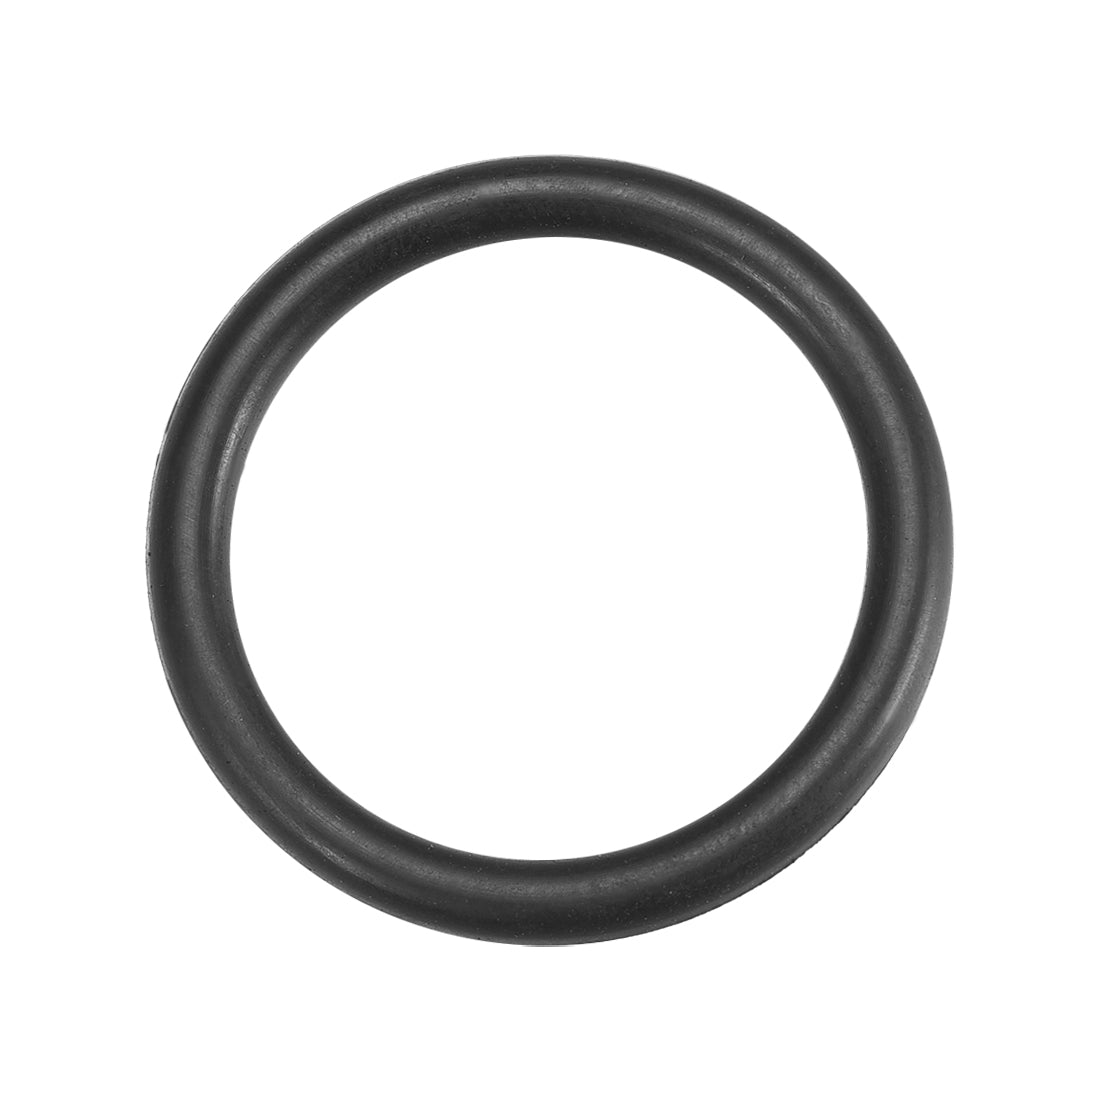 uxcell Uxcell 20 Pcs 28mm x 3mm Rubber O Type Sealing Ring Gasket Grommets Black